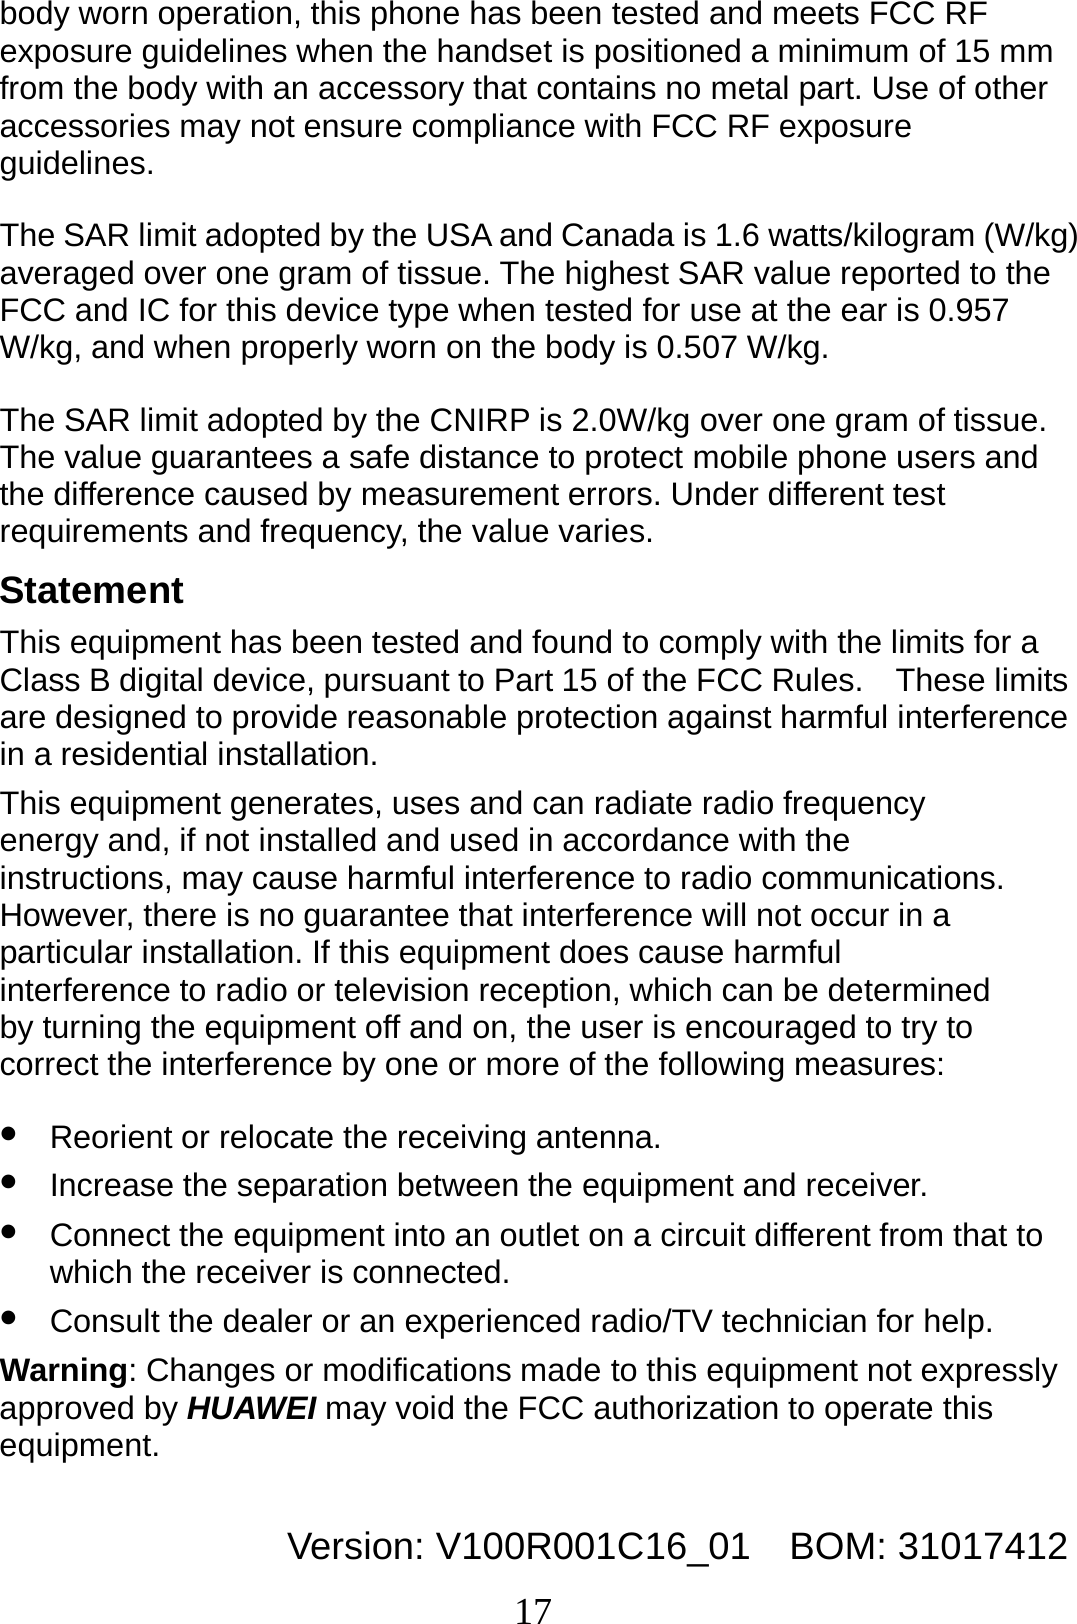 17 body worn operation, this phone has been tested and meets FCC RF exposure guidelines when the handset is positioned a minimum of 15 mm from the body with an accessory that contains no metal part. Use of other accessories may not ensure compliance with FCC RF exposure guidelines. The SAR limit adopted by the USA and Canada is 1.6 watts/kilogram (W/kg) averaged over one gram of tissue. The highest SAR value reported to the FCC and IC for this device type when tested for use at the ear is 0.957 W/kg, and when properly worn on the body is 0.507 W/kg. The SAR limit adopted by the CNIRP is 2.0W/kg over one gram of tissue. The value guarantees a safe distance to protect mobile phone users and the difference caused by measurement errors. Under different test requirements and frequency, the value varies.   Statement This equipment has been tested and found to comply with the limits for a Class B digital device, pursuant to Part 15 of the FCC Rules.    These limits are designed to provide reasonable protection against harmful interference in a residential installation. This equipment generates, uses and can radiate radio frequency energy and, if not installed and used in accordance with the instructions, may cause harmful interference to radio communications.   However, there is no guarantee that interference will not occur in a particular installation. If this equipment does cause harmful interference to radio or television reception, which can be determined by turning the equipment off and on, the user is encouraged to try to correct the interference by one or more of the following measures: z Reorient or relocate the receiving antenna. z Increase the separation between the equipment and receiver. z Connect the equipment into an outlet on a circuit different from that to which the receiver is connected. z Consult the dealer or an experienced radio/TV technician for help. Warning: Changes or modifications made to this equipment not expressly approved by HUAWEI may void the FCC authorization to operate this equipment.  Version: V100R001C16_01    BOM: 31017412 